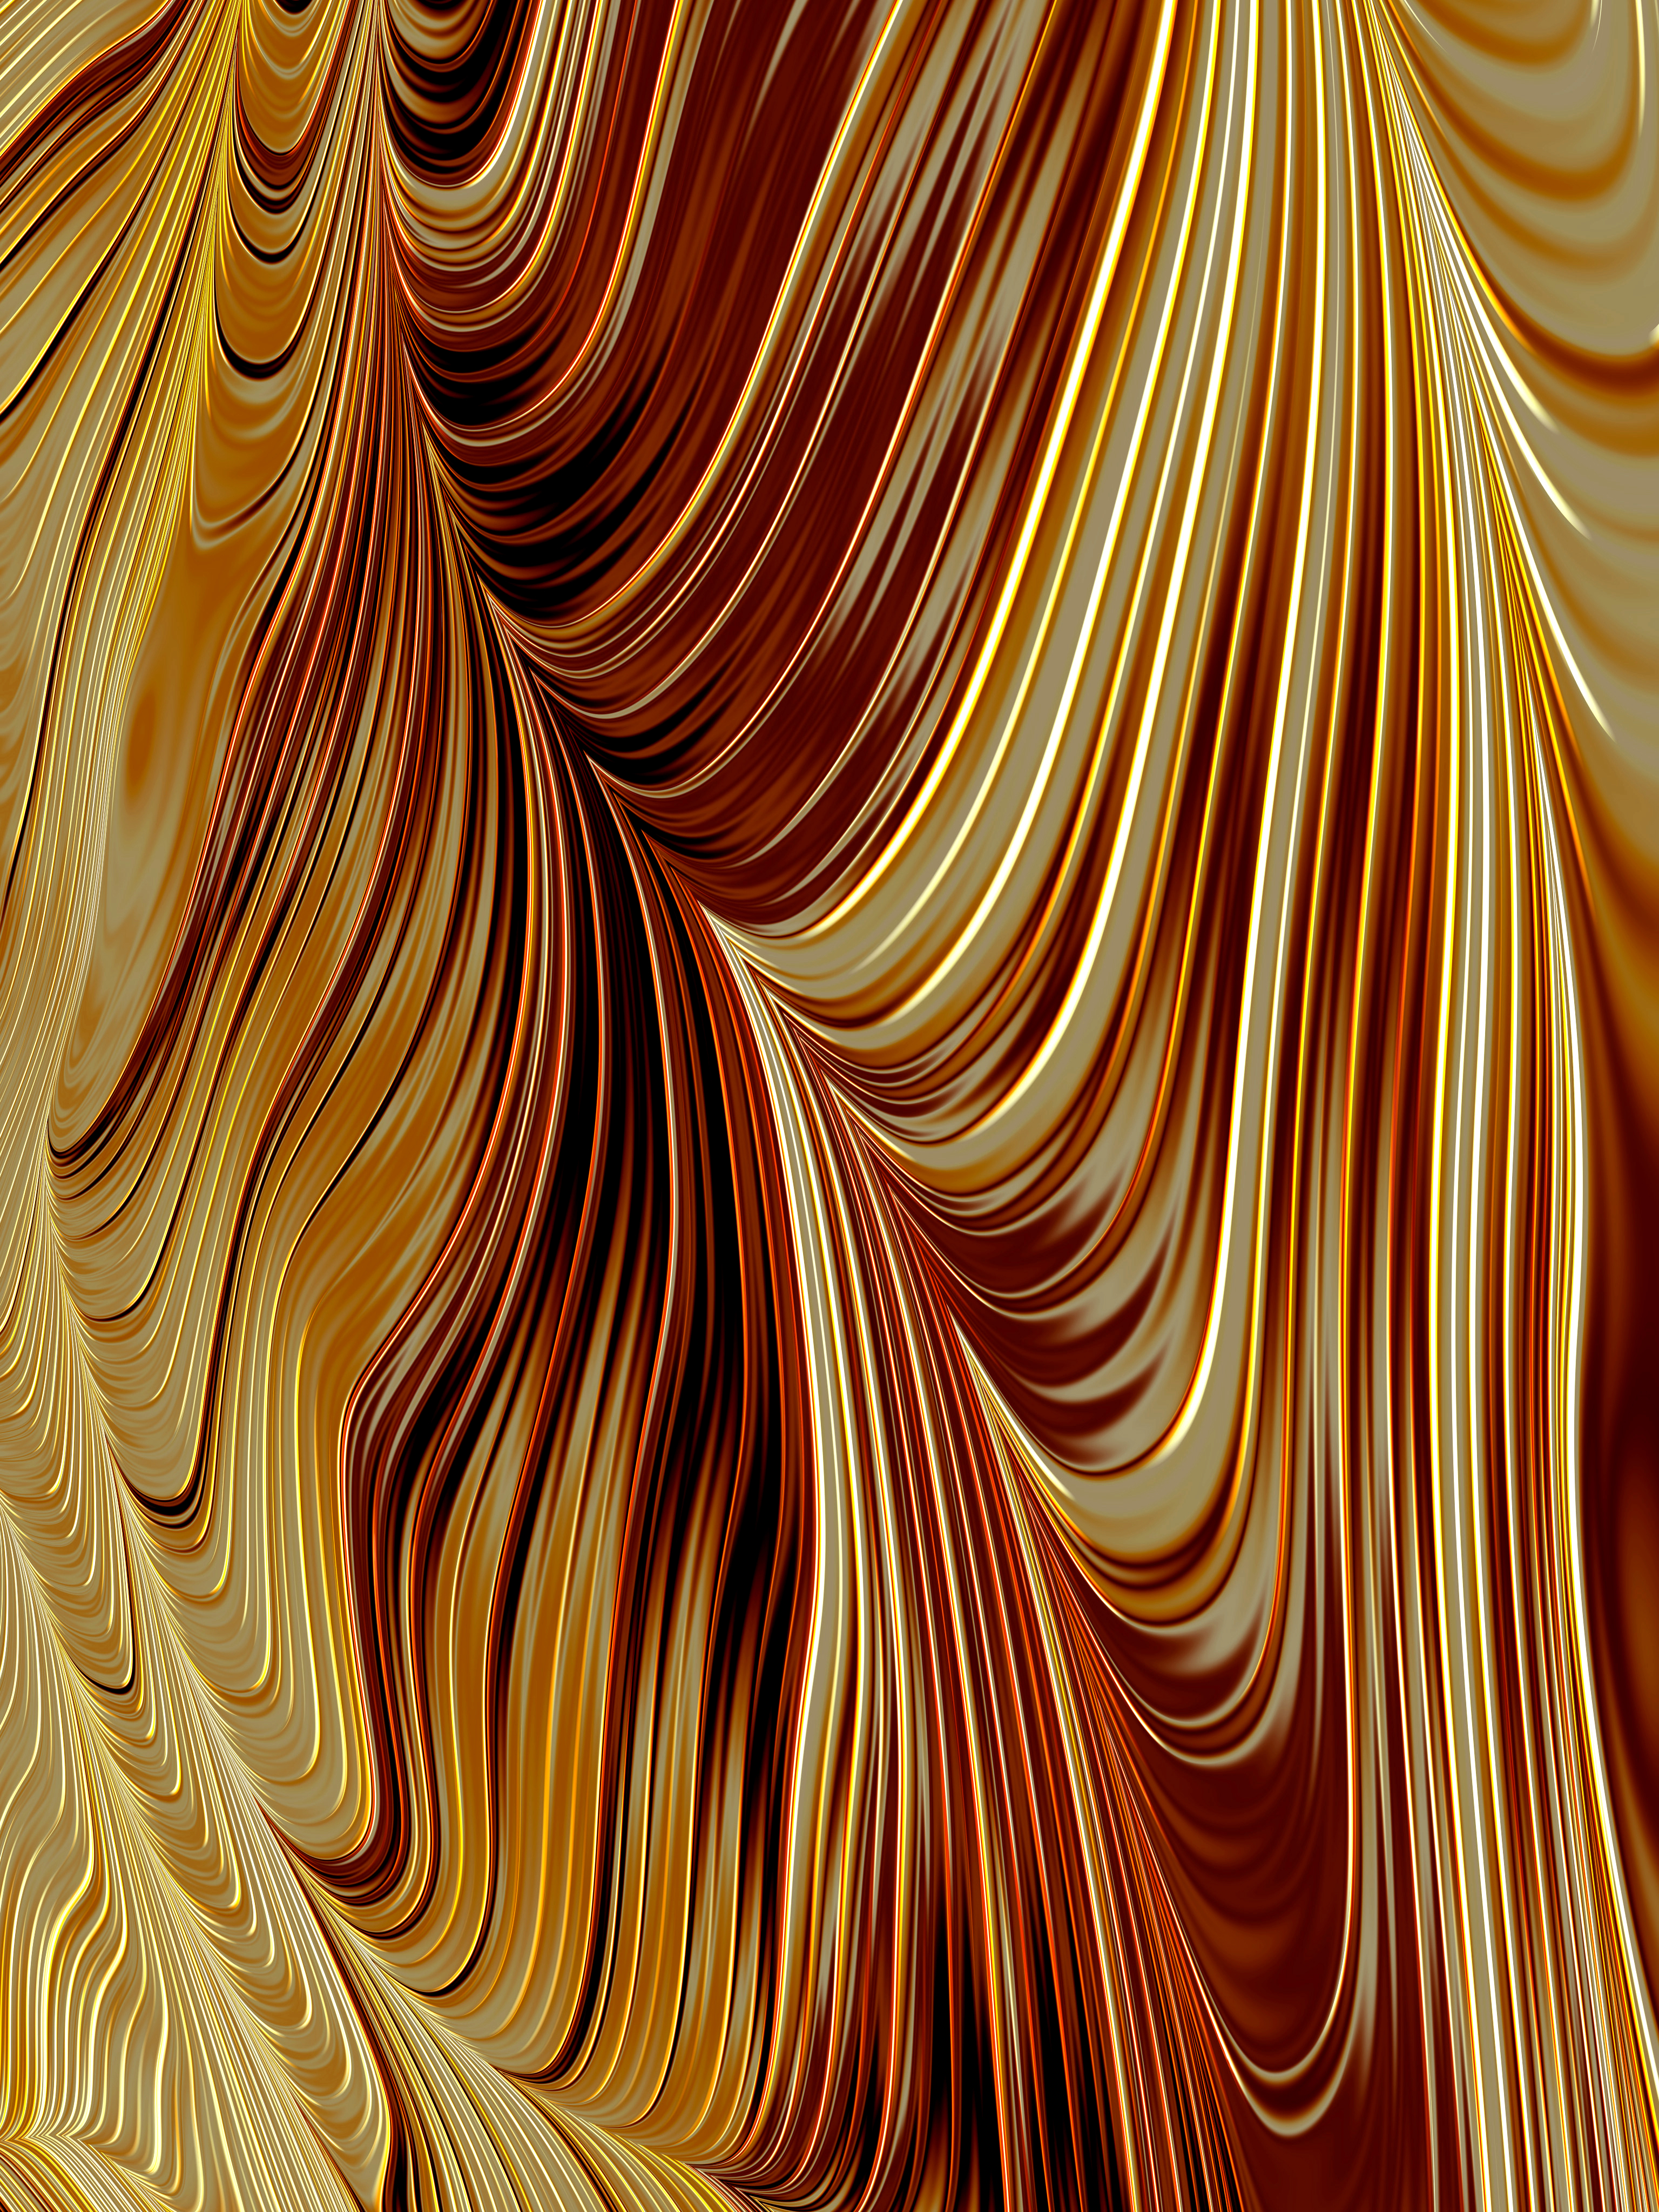 58609 2560x1080 PC pictures for free, download metallic, gold, 3d, winding 2560x1080 wallpapers on your desktop